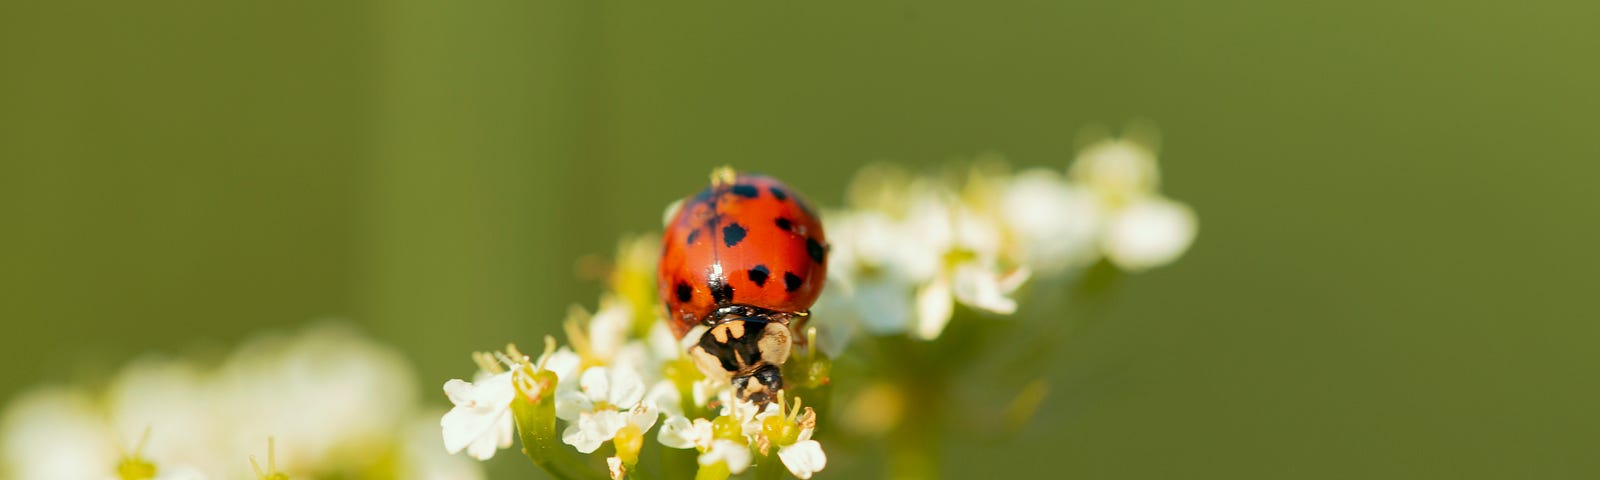 A ladybug crawling over delicate white Yarrow flowers.